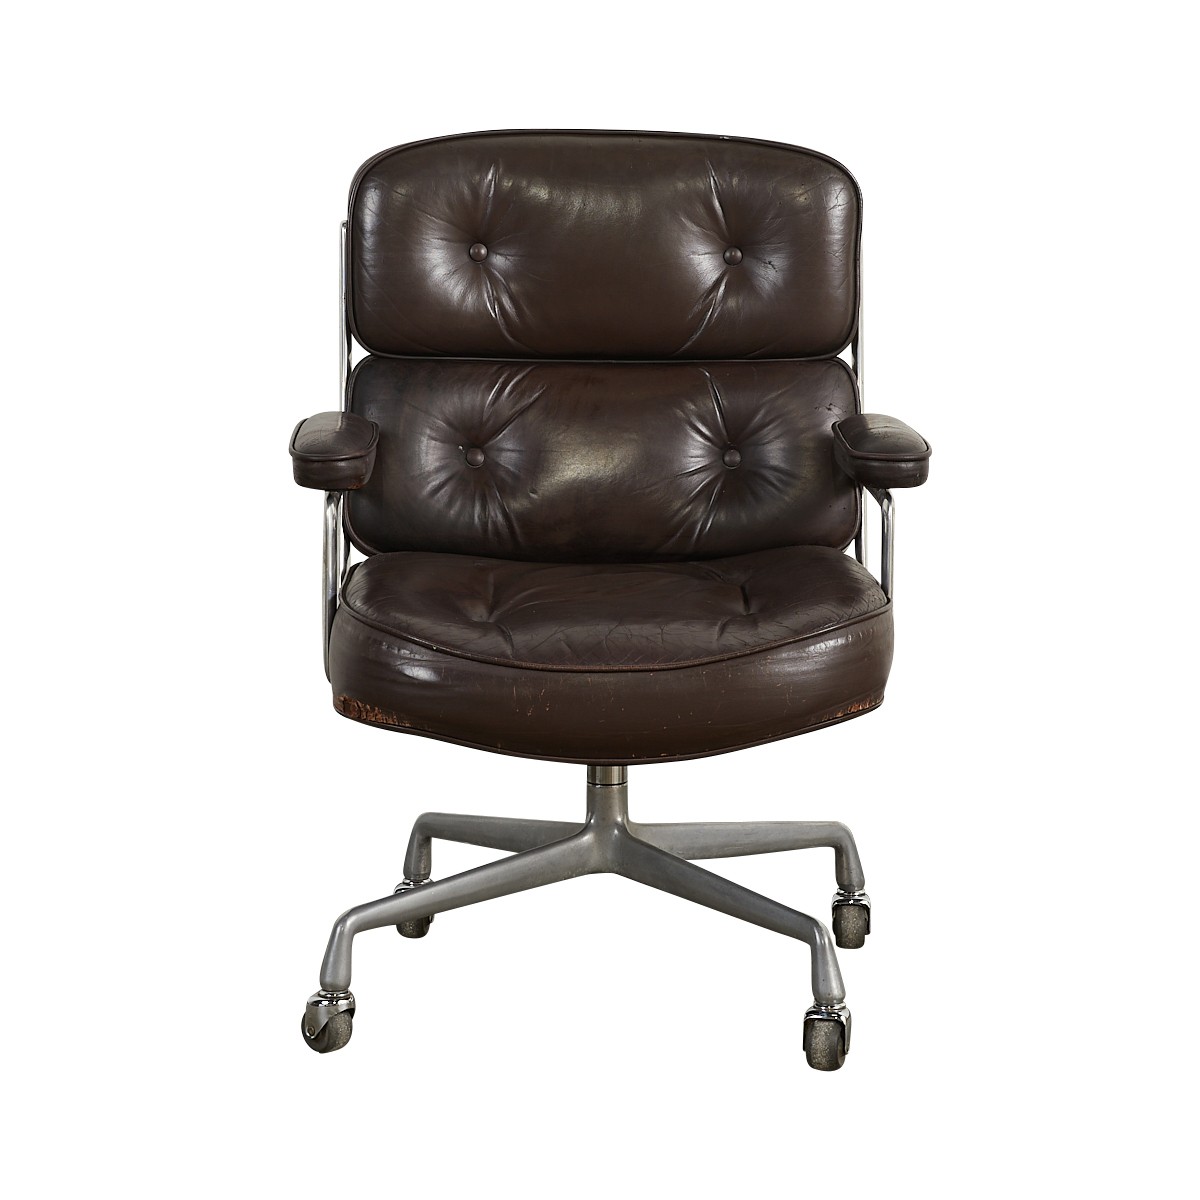 Eames Herman Miller Time Life Chair 1st Gen. - Image 3 of 14